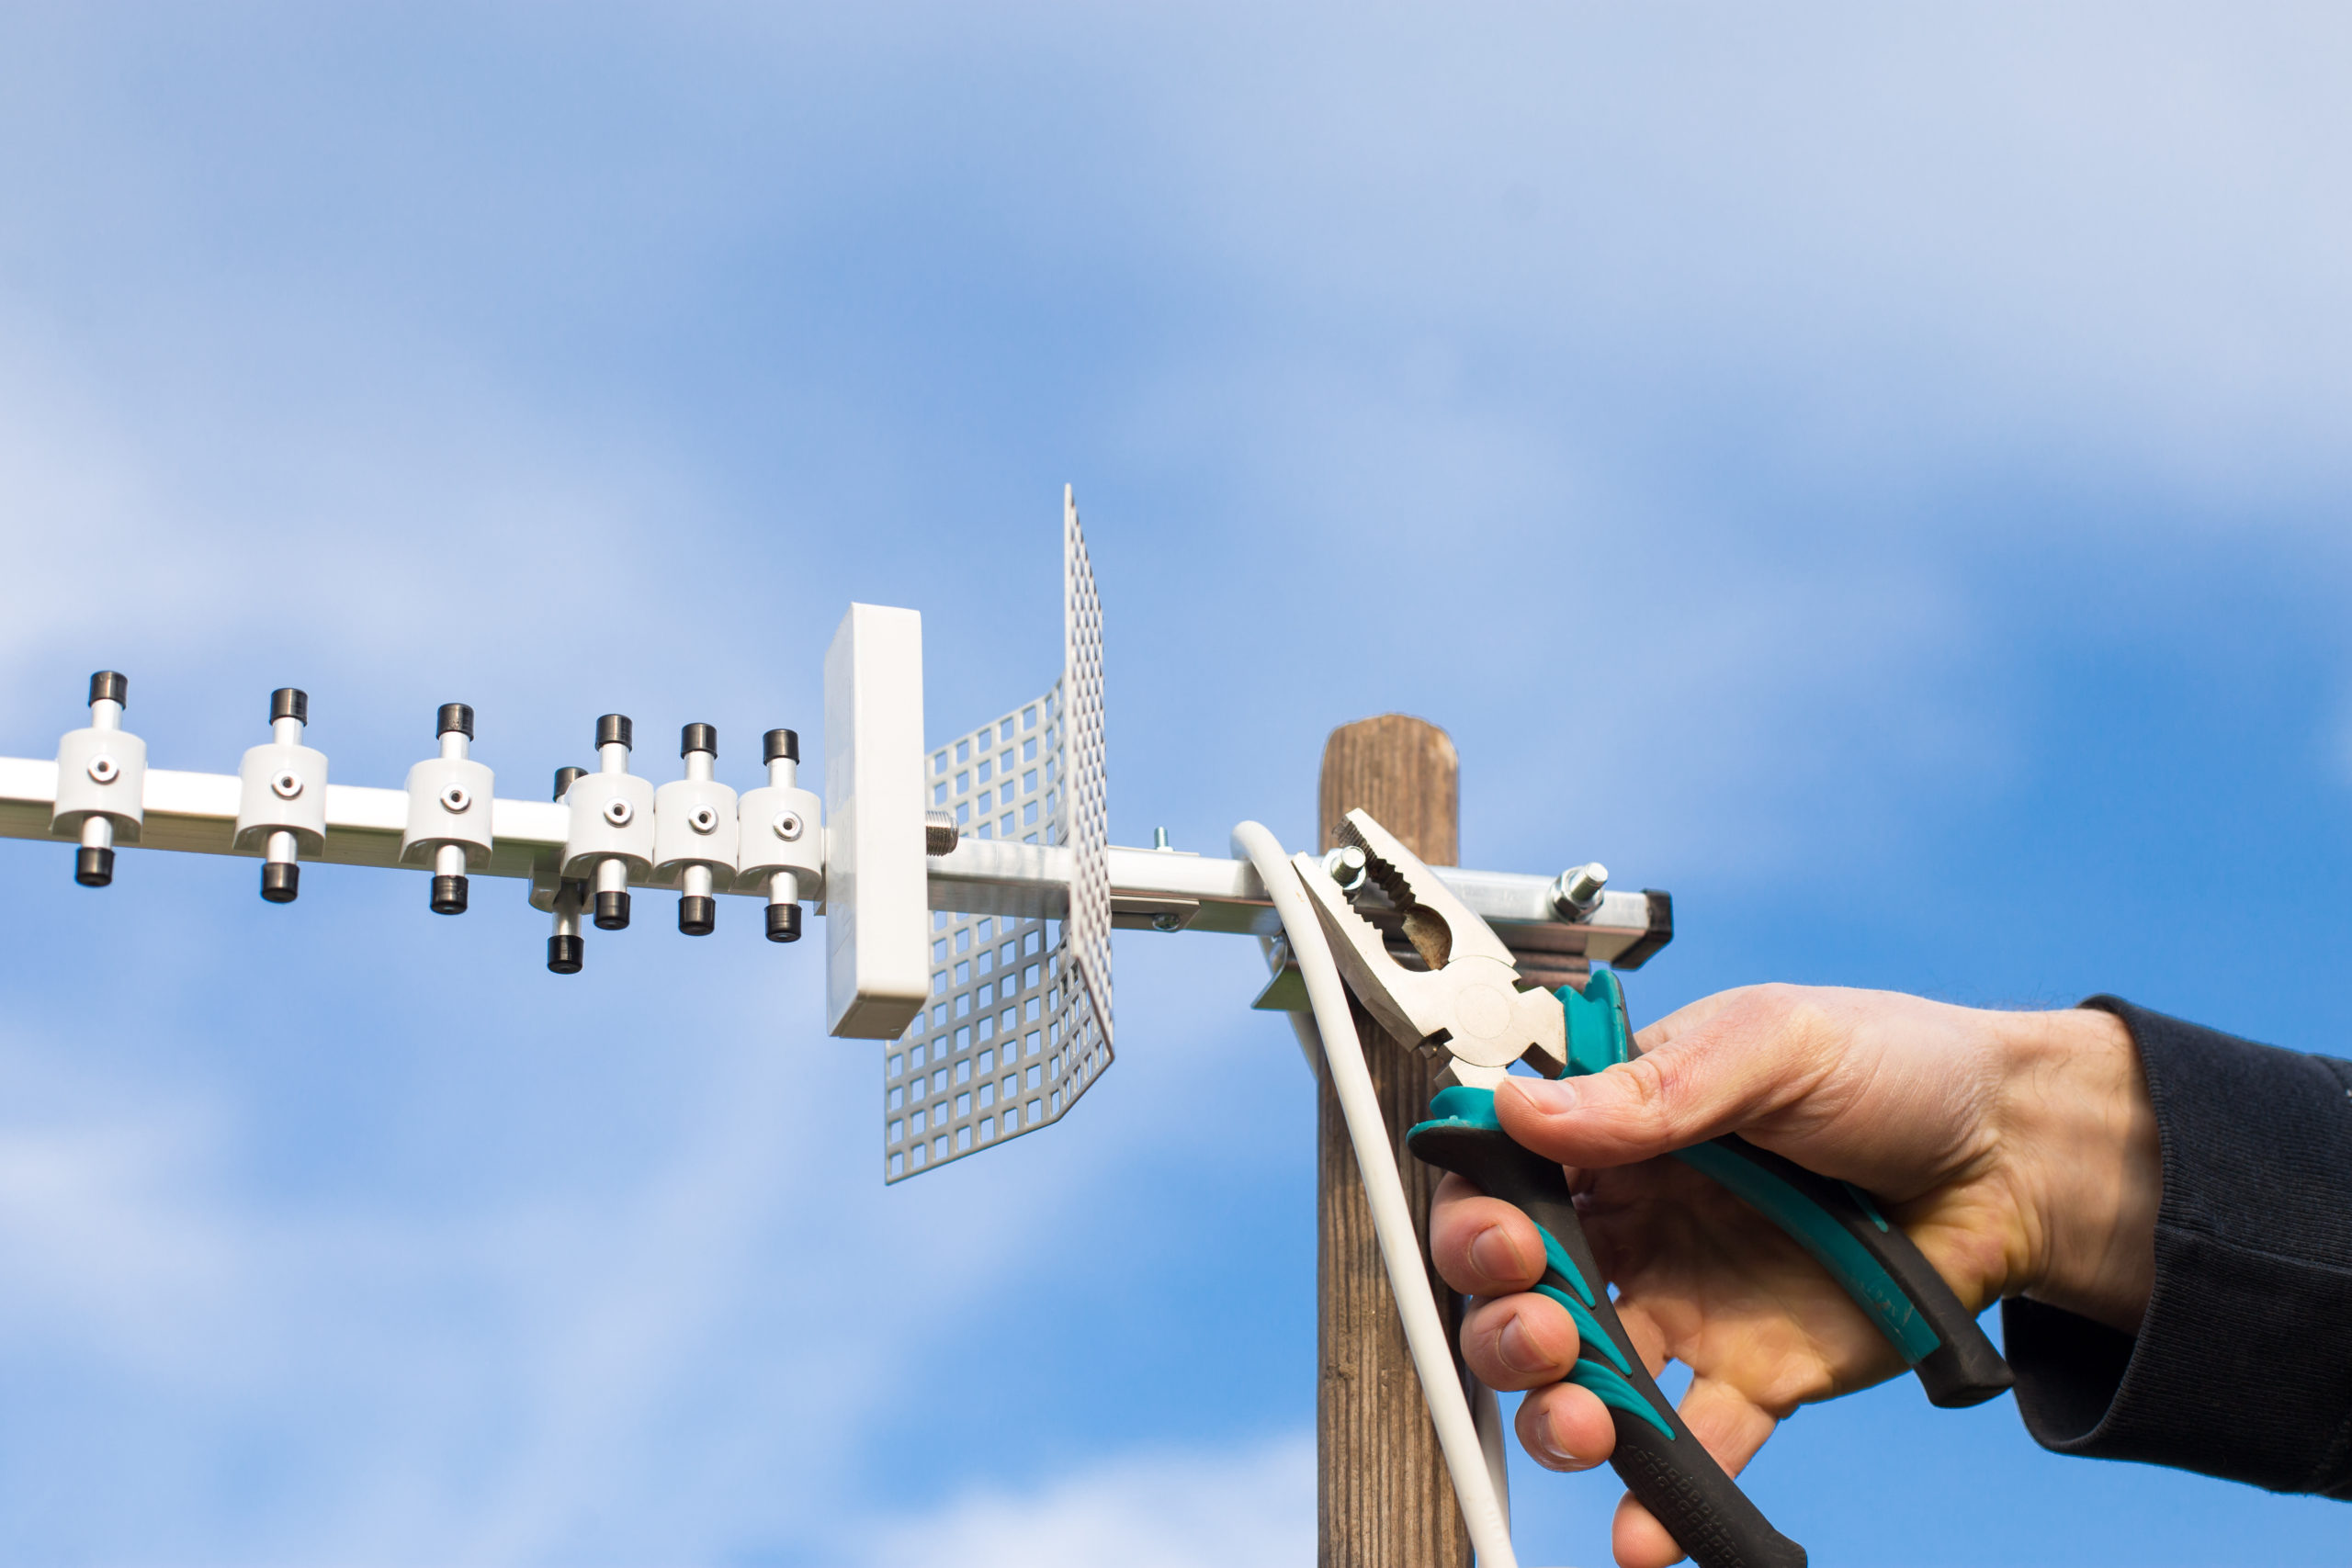 Guide to outdoor TV antenna installation - The Free TV Project